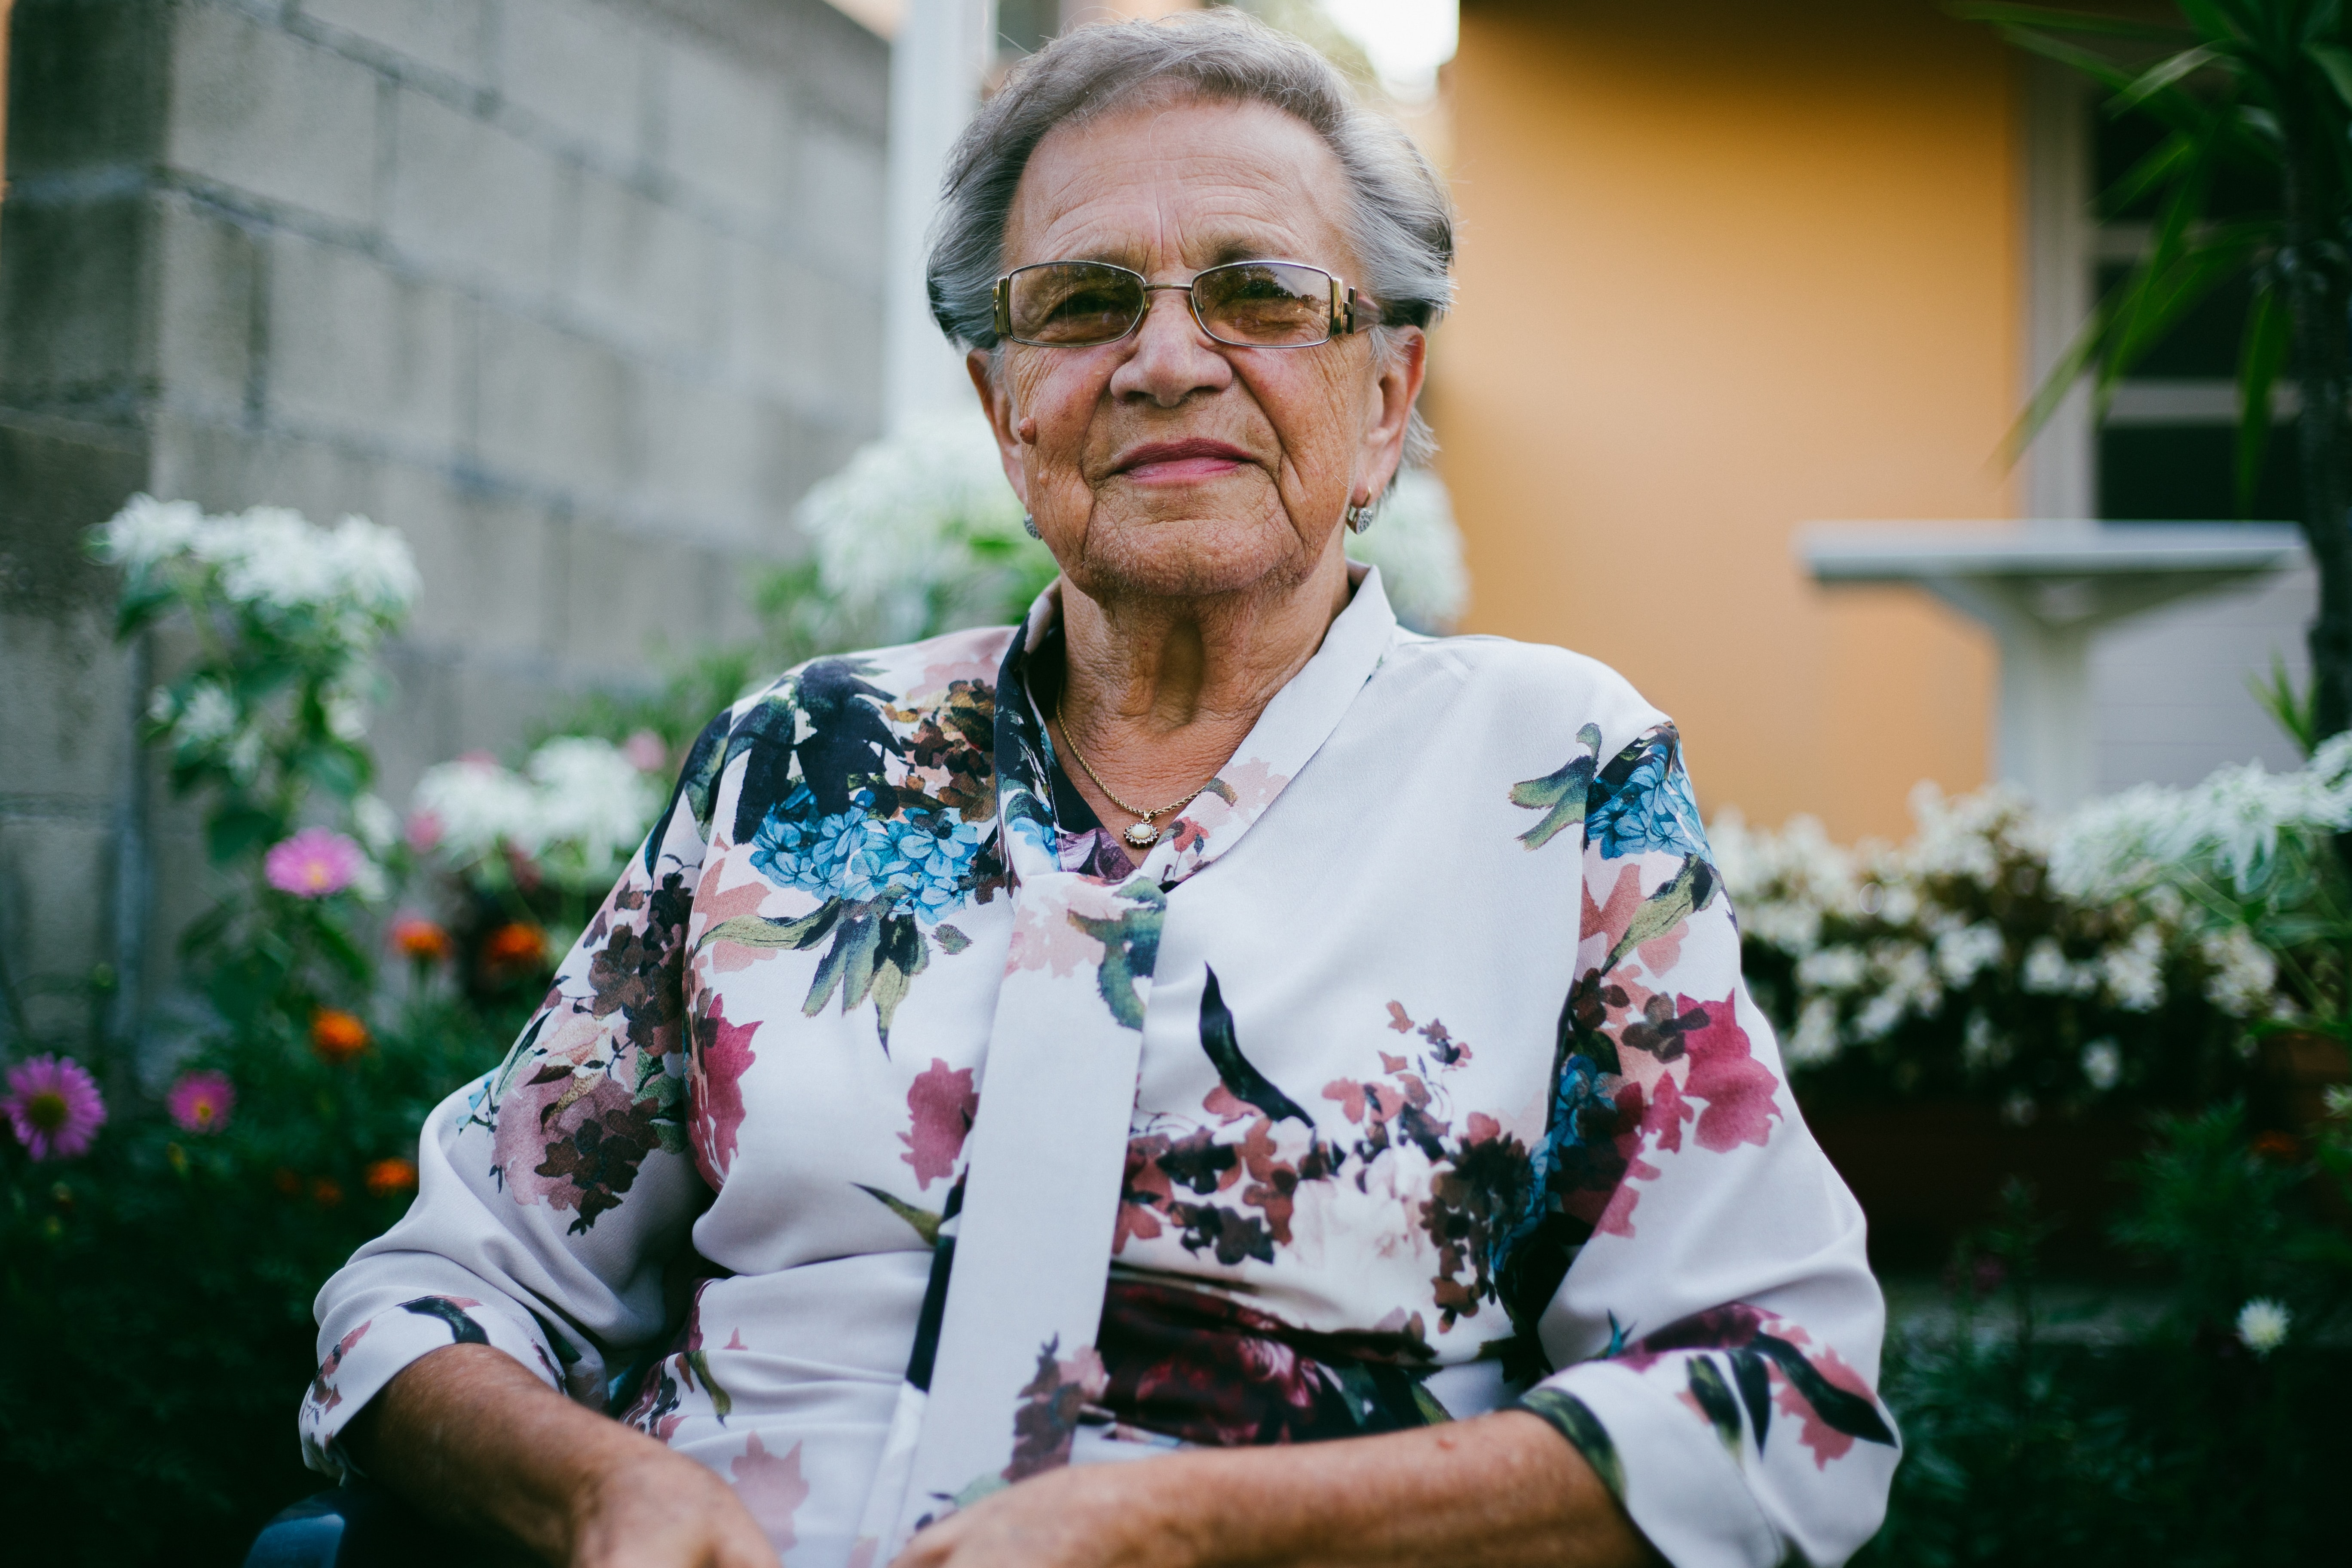 An older woman with flowered shirt sits and smiles in front of her garden.